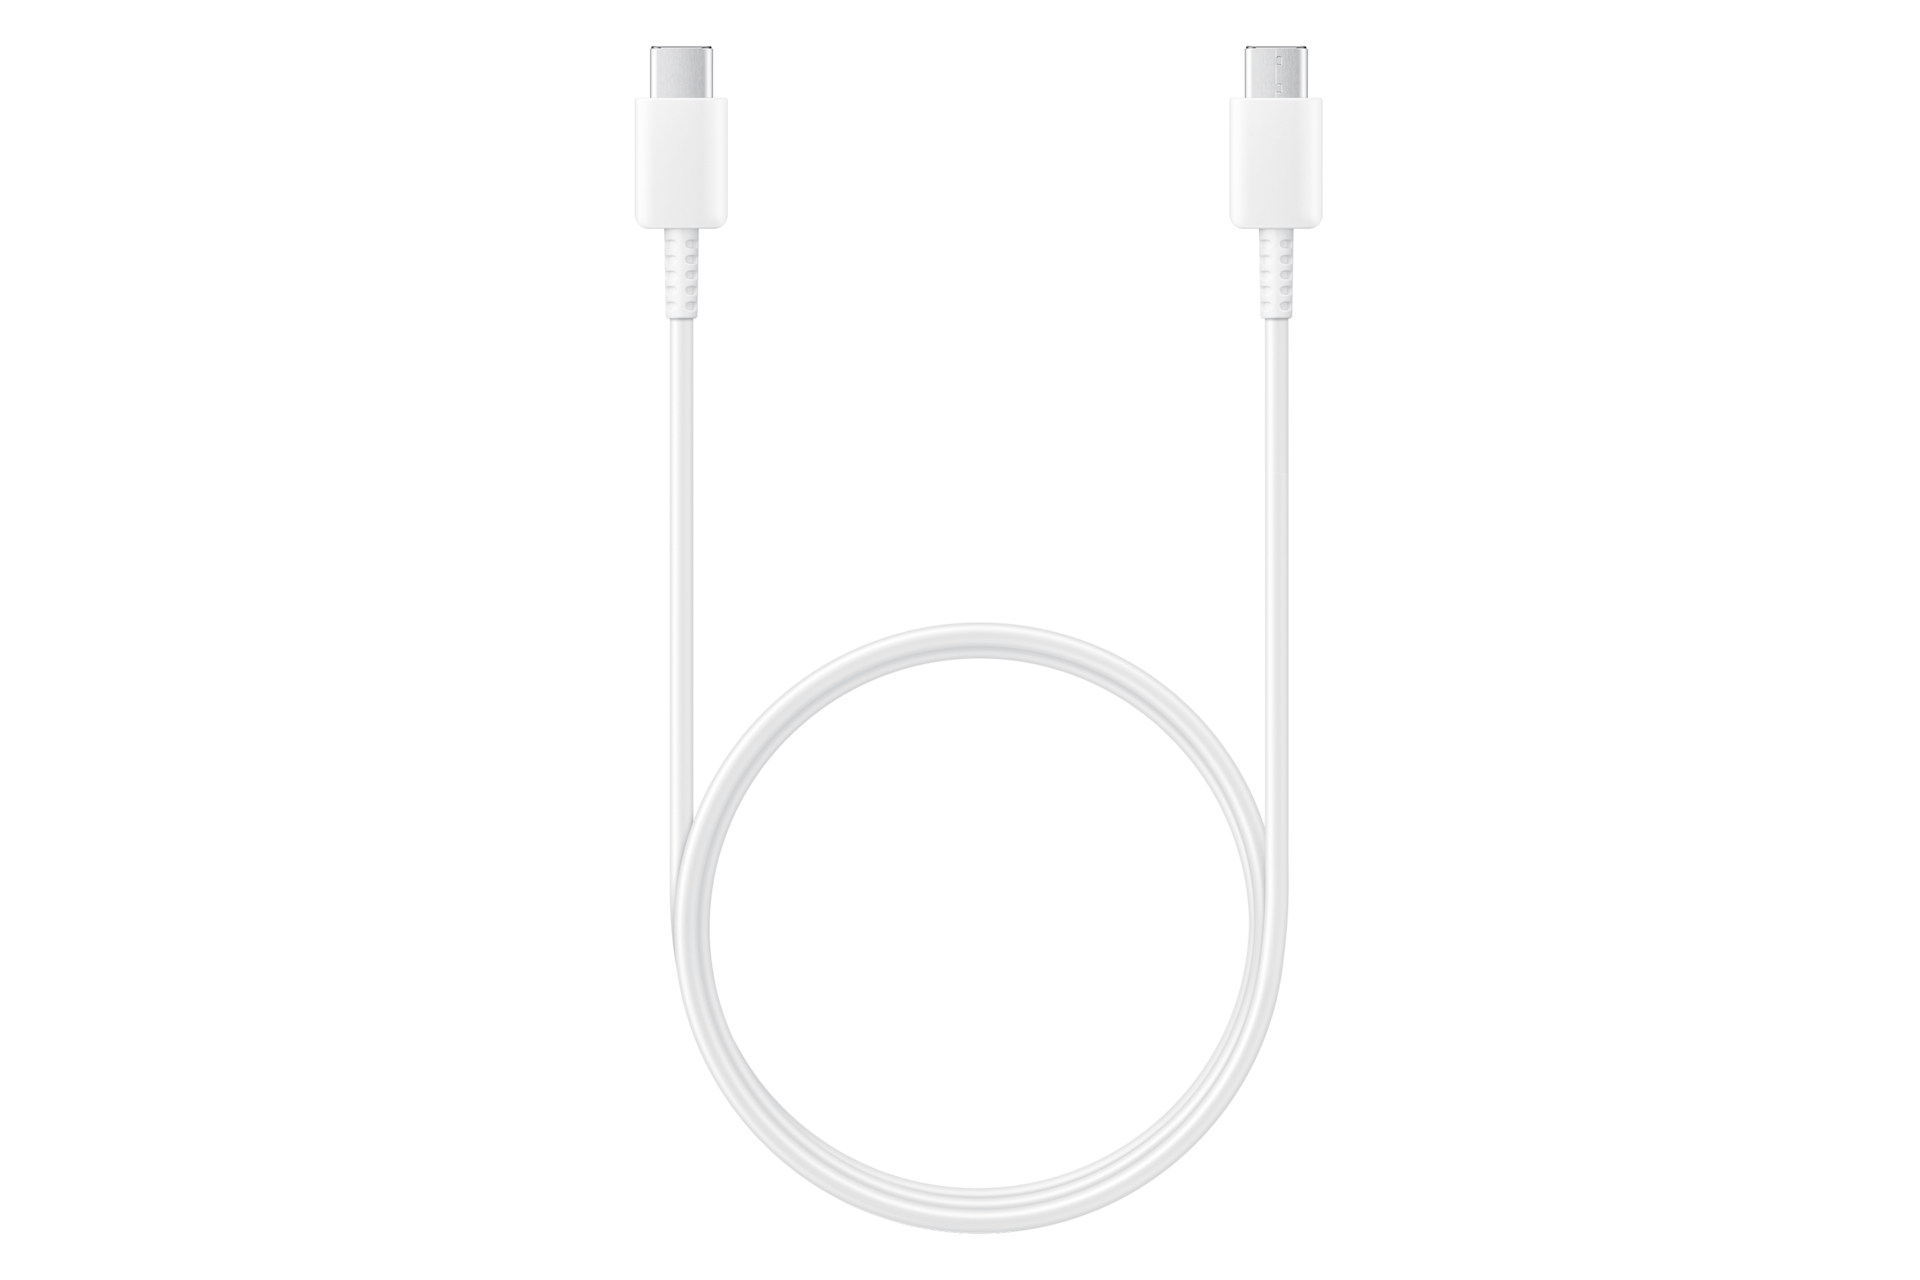 https://images.samsung.com/is/image/samsung/in-c-to-c-cable-da705b-ep-da705bwegin-frontwhite-182246043?$650_519_PNG$